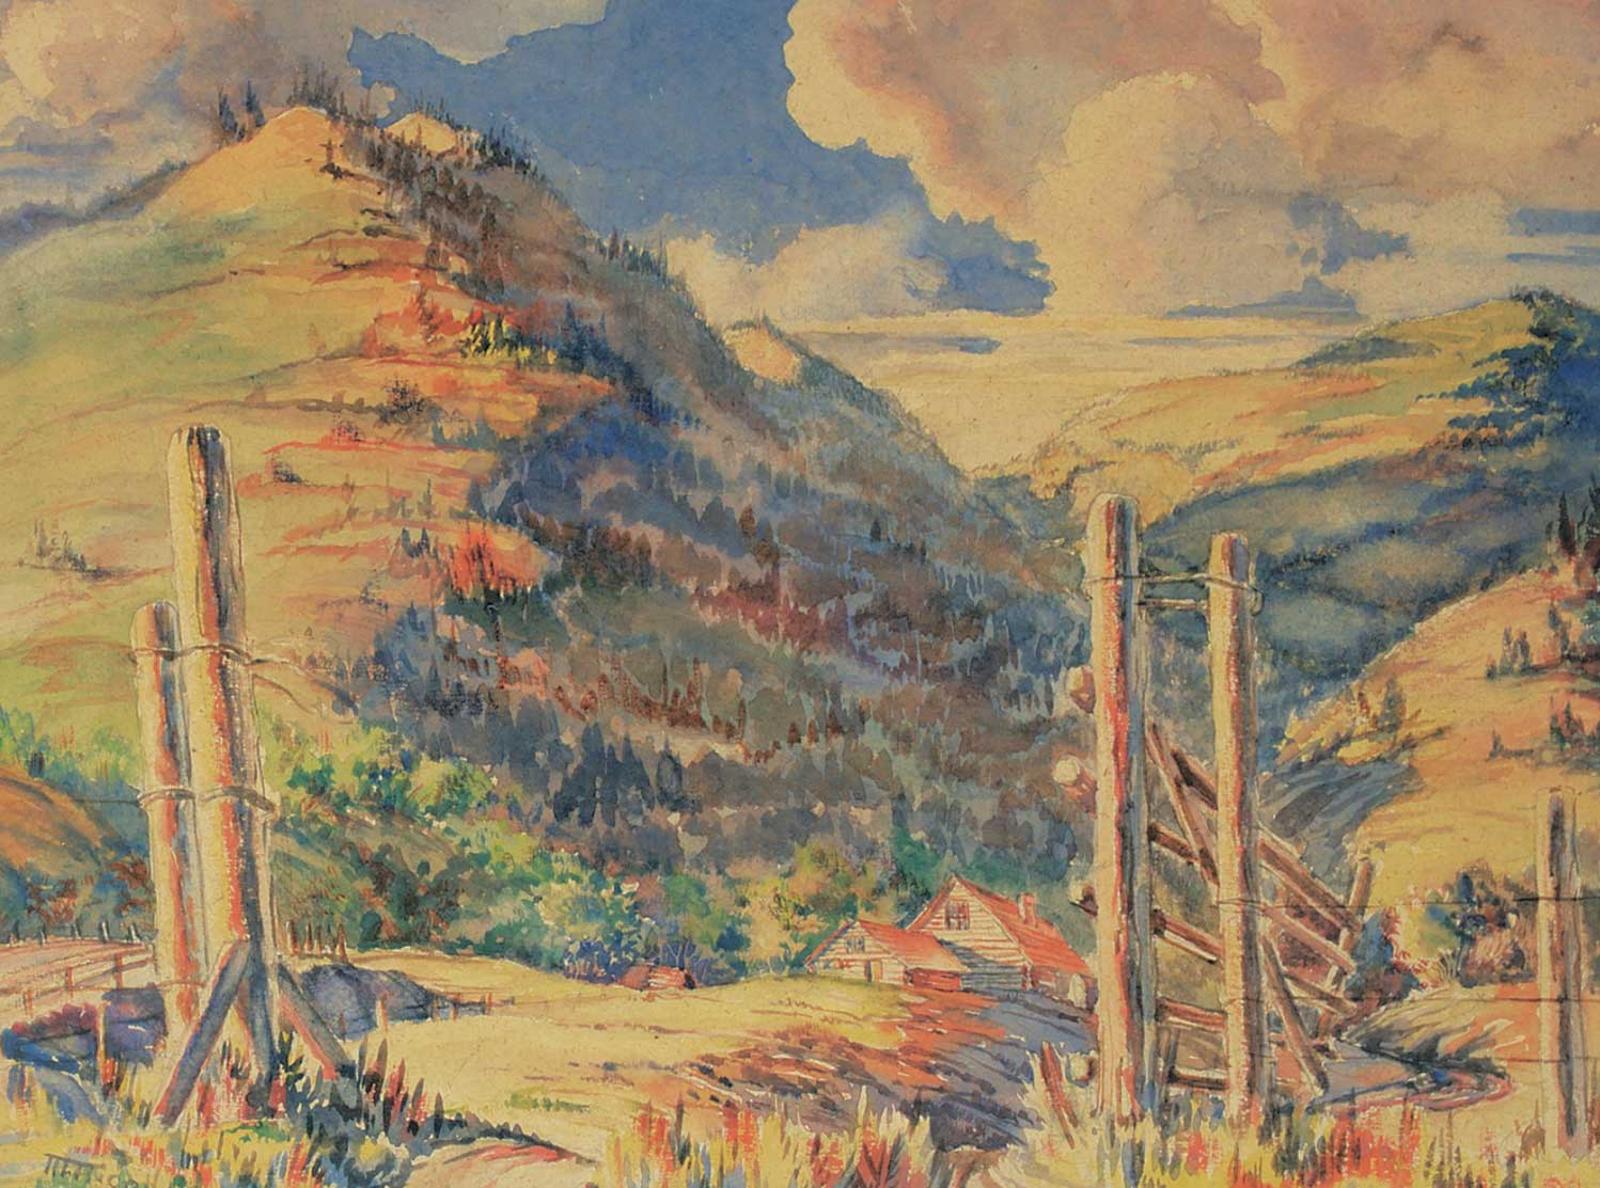 Marion Florence S. MacKay Nicoll (1909-1985) - Untitled - View of Our Ranch